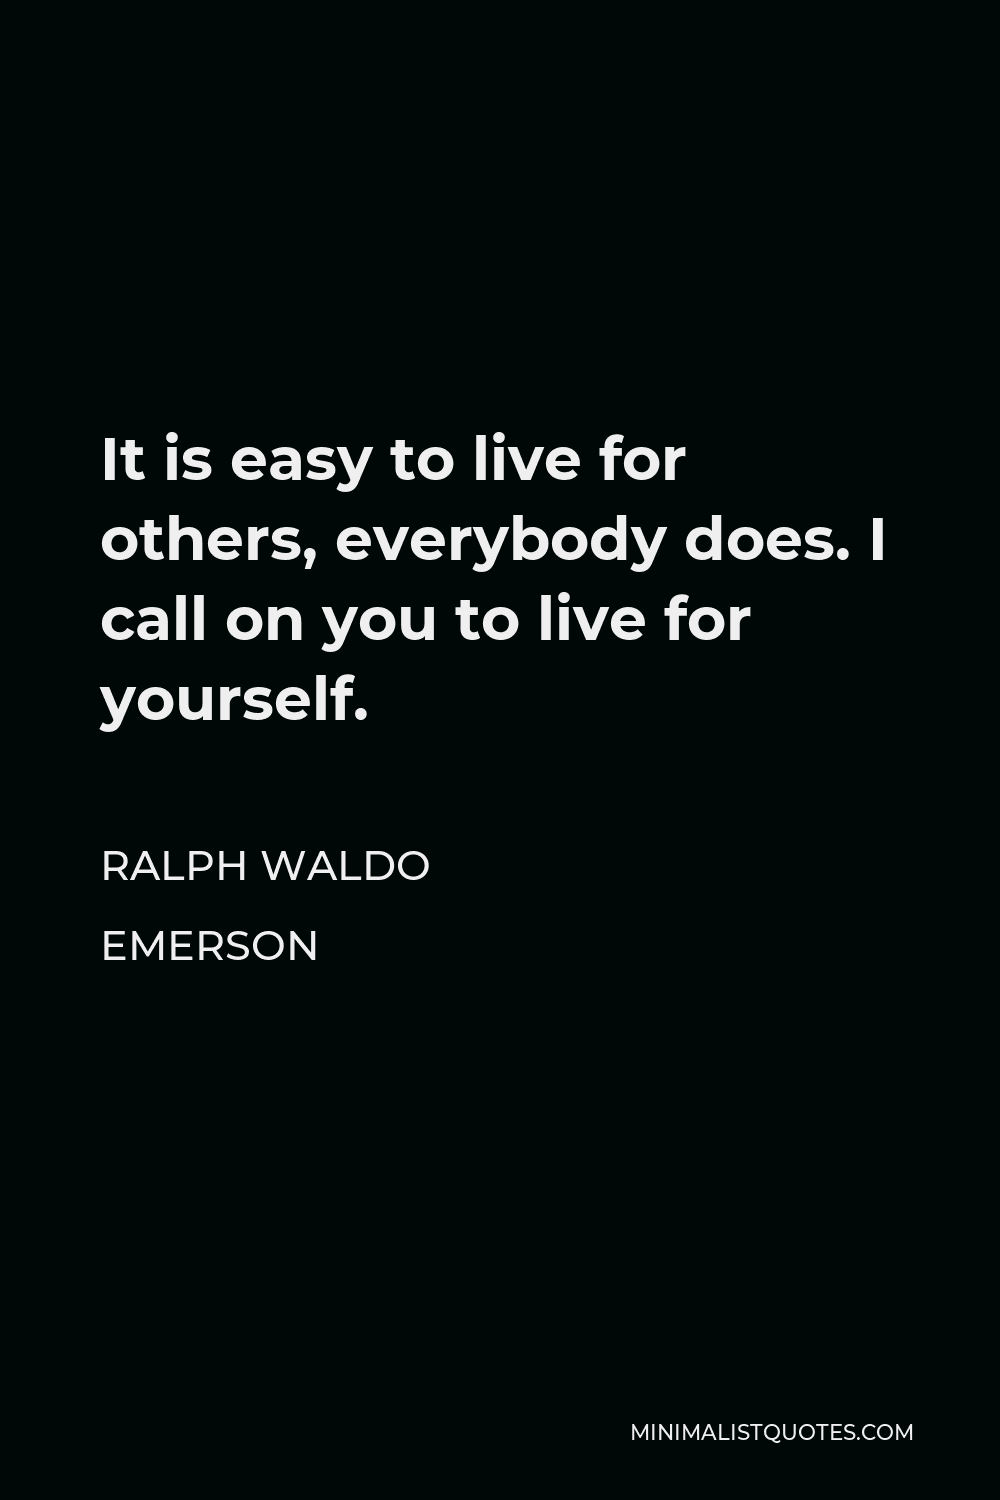 Ralph Waldo Emerson Quote - It is easy to live for others, everybody does. I call on you to live for yourself.